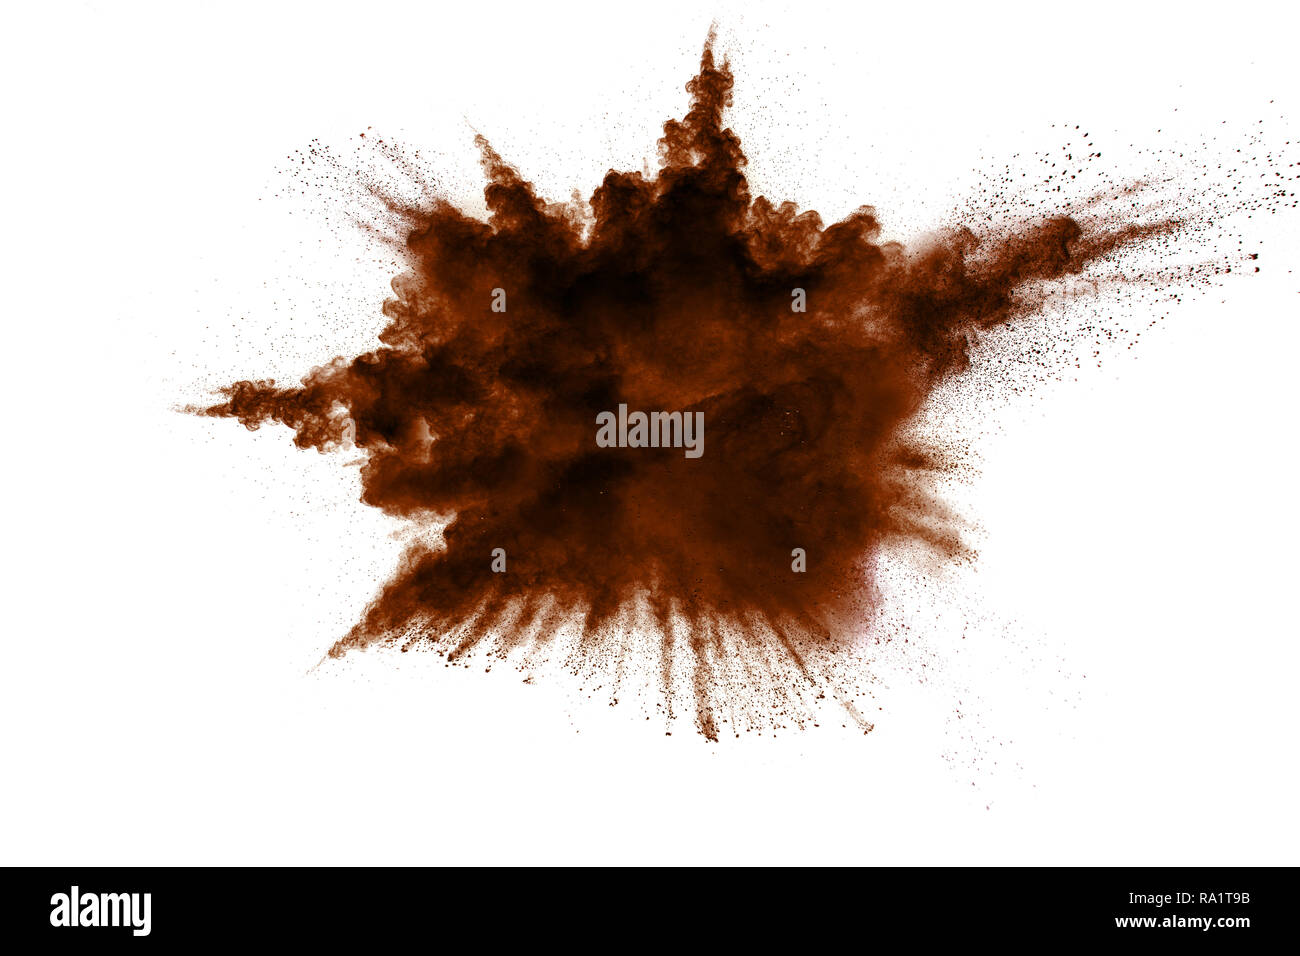 Freeze motion of brown dust explosion. Stopping the movement of brown powder. Explosive brown powder on white background. Dry soil splater on white ba Stock Photo